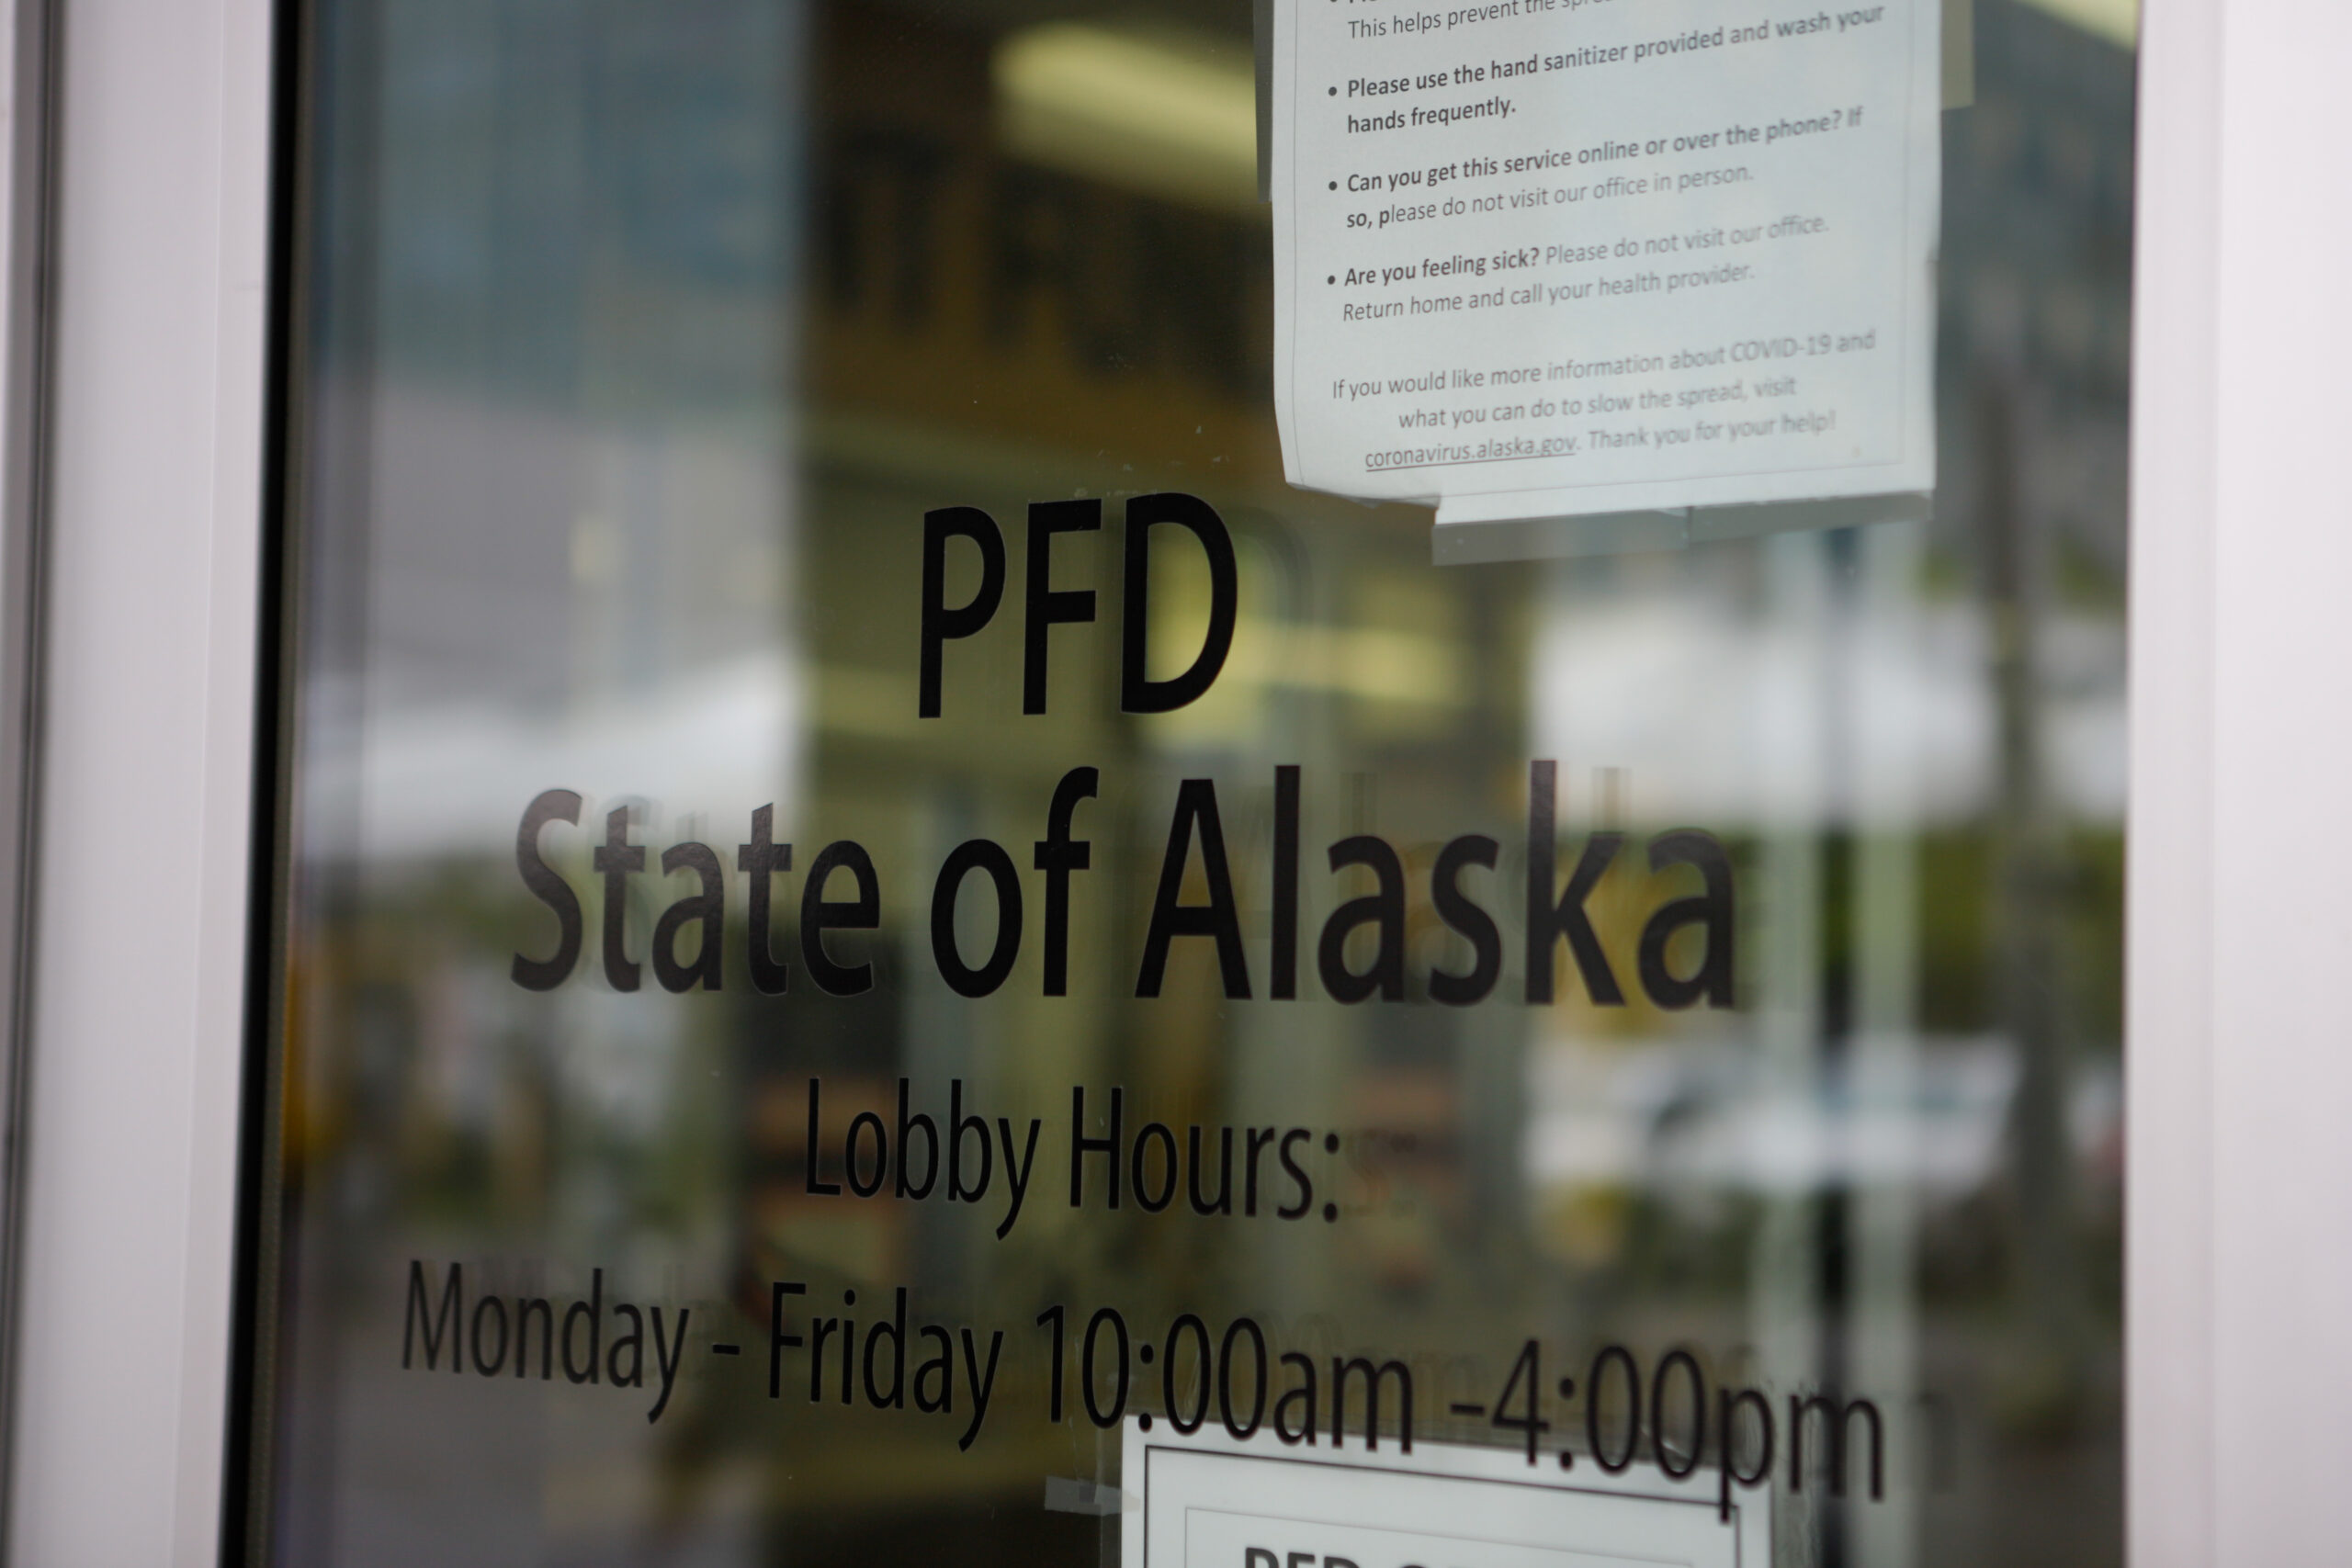 The glass door to the entrance of the PFD office. In black lettering is "PFD State of Alaska, Lobby hours Monday-Friday 10 a.m. to 4 p.m."